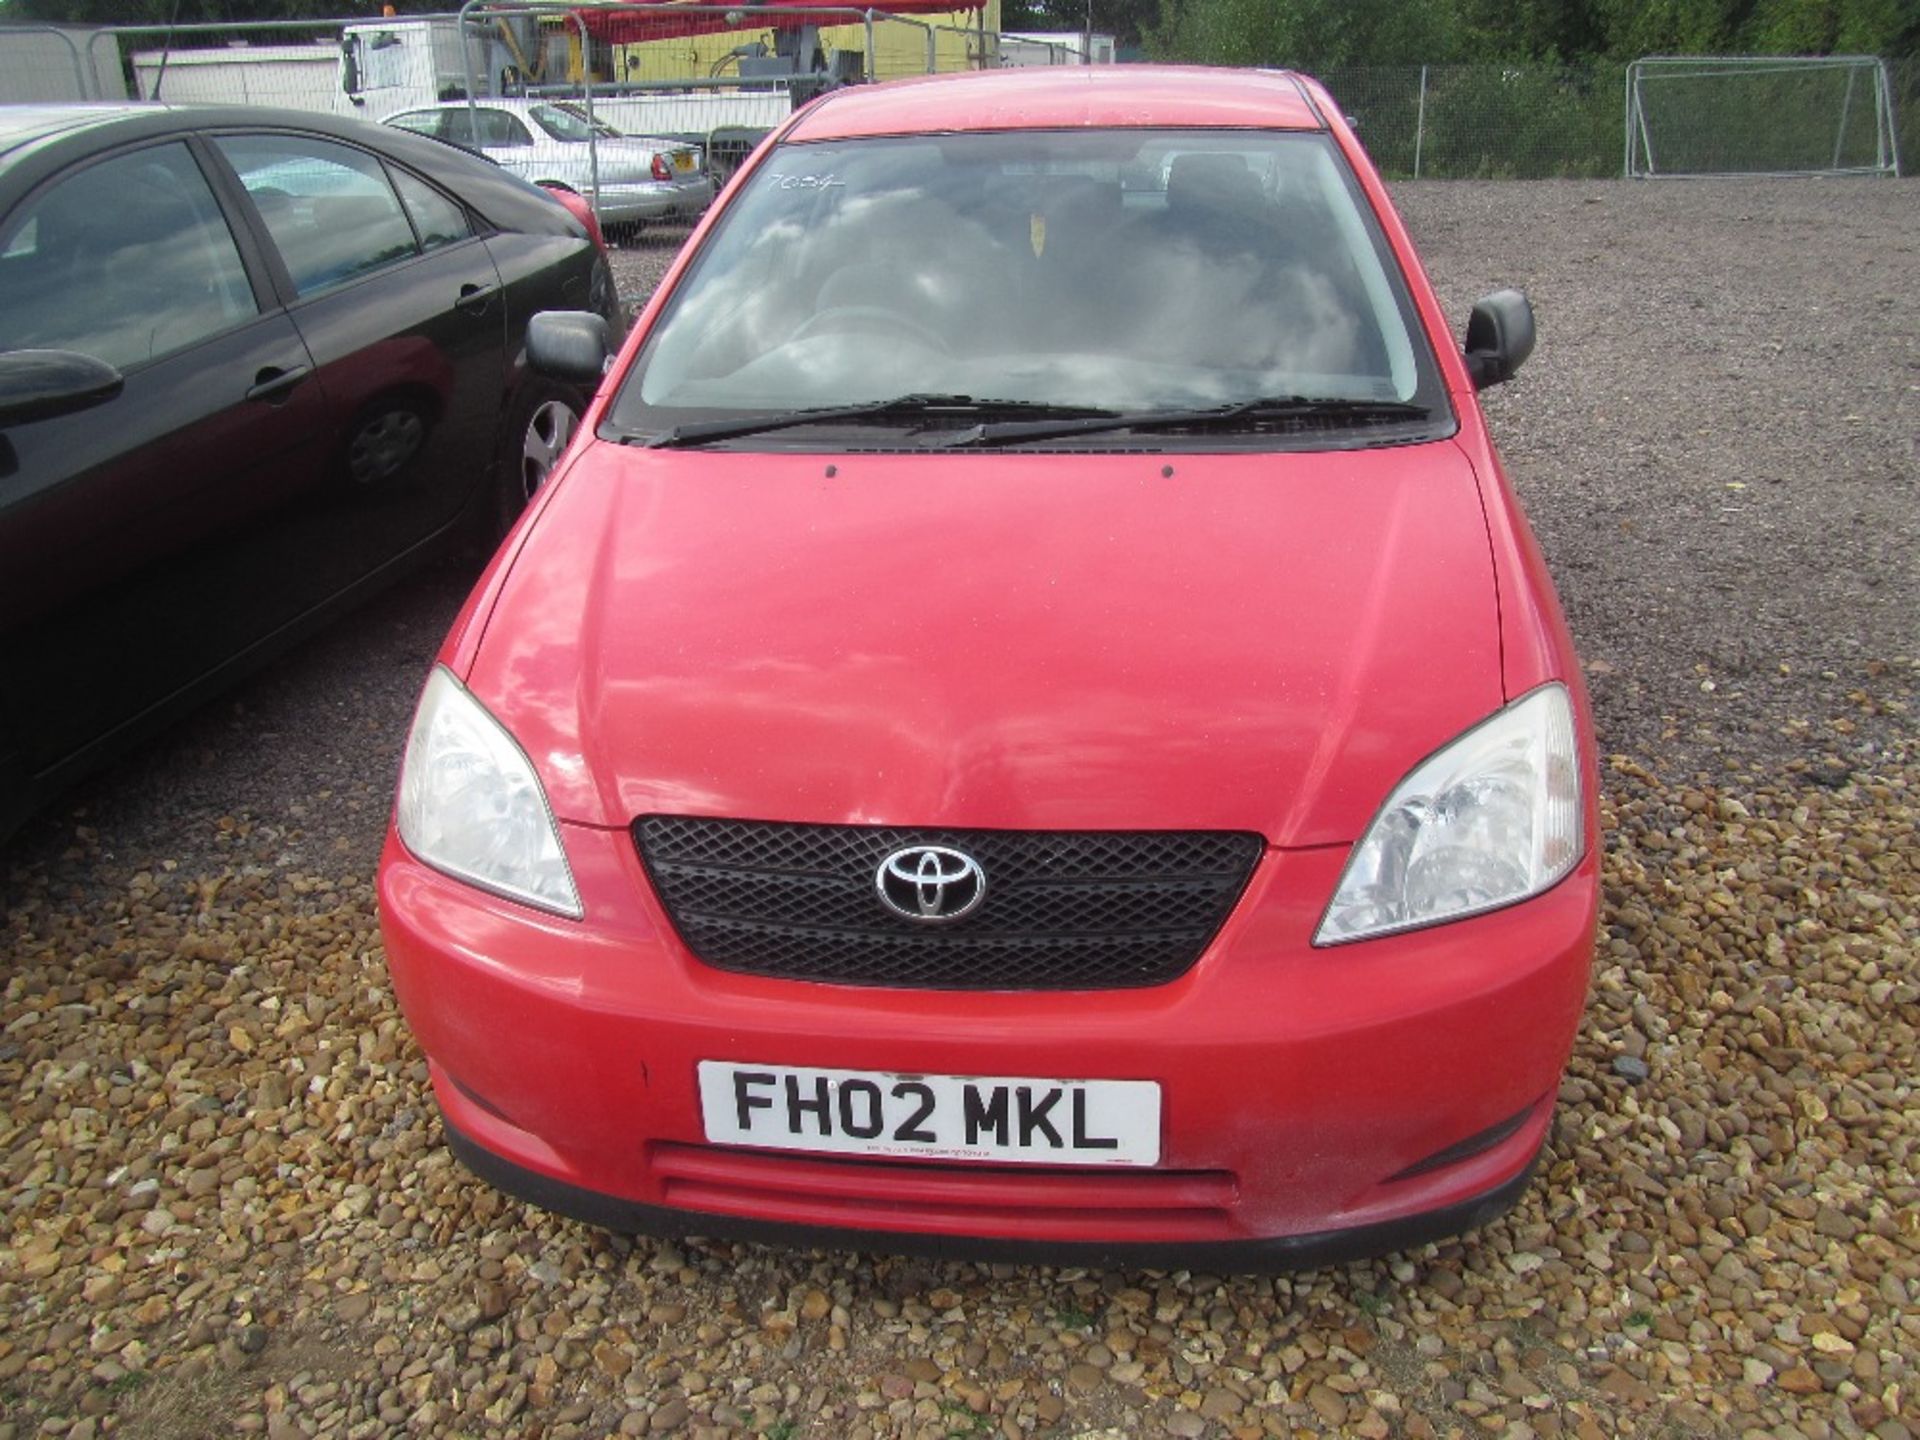 Toyota Corrola 1.4 Petrol. 1 Owner from new. Reg. Docs & Service History will be supplied Mileage: - Image 2 of 6